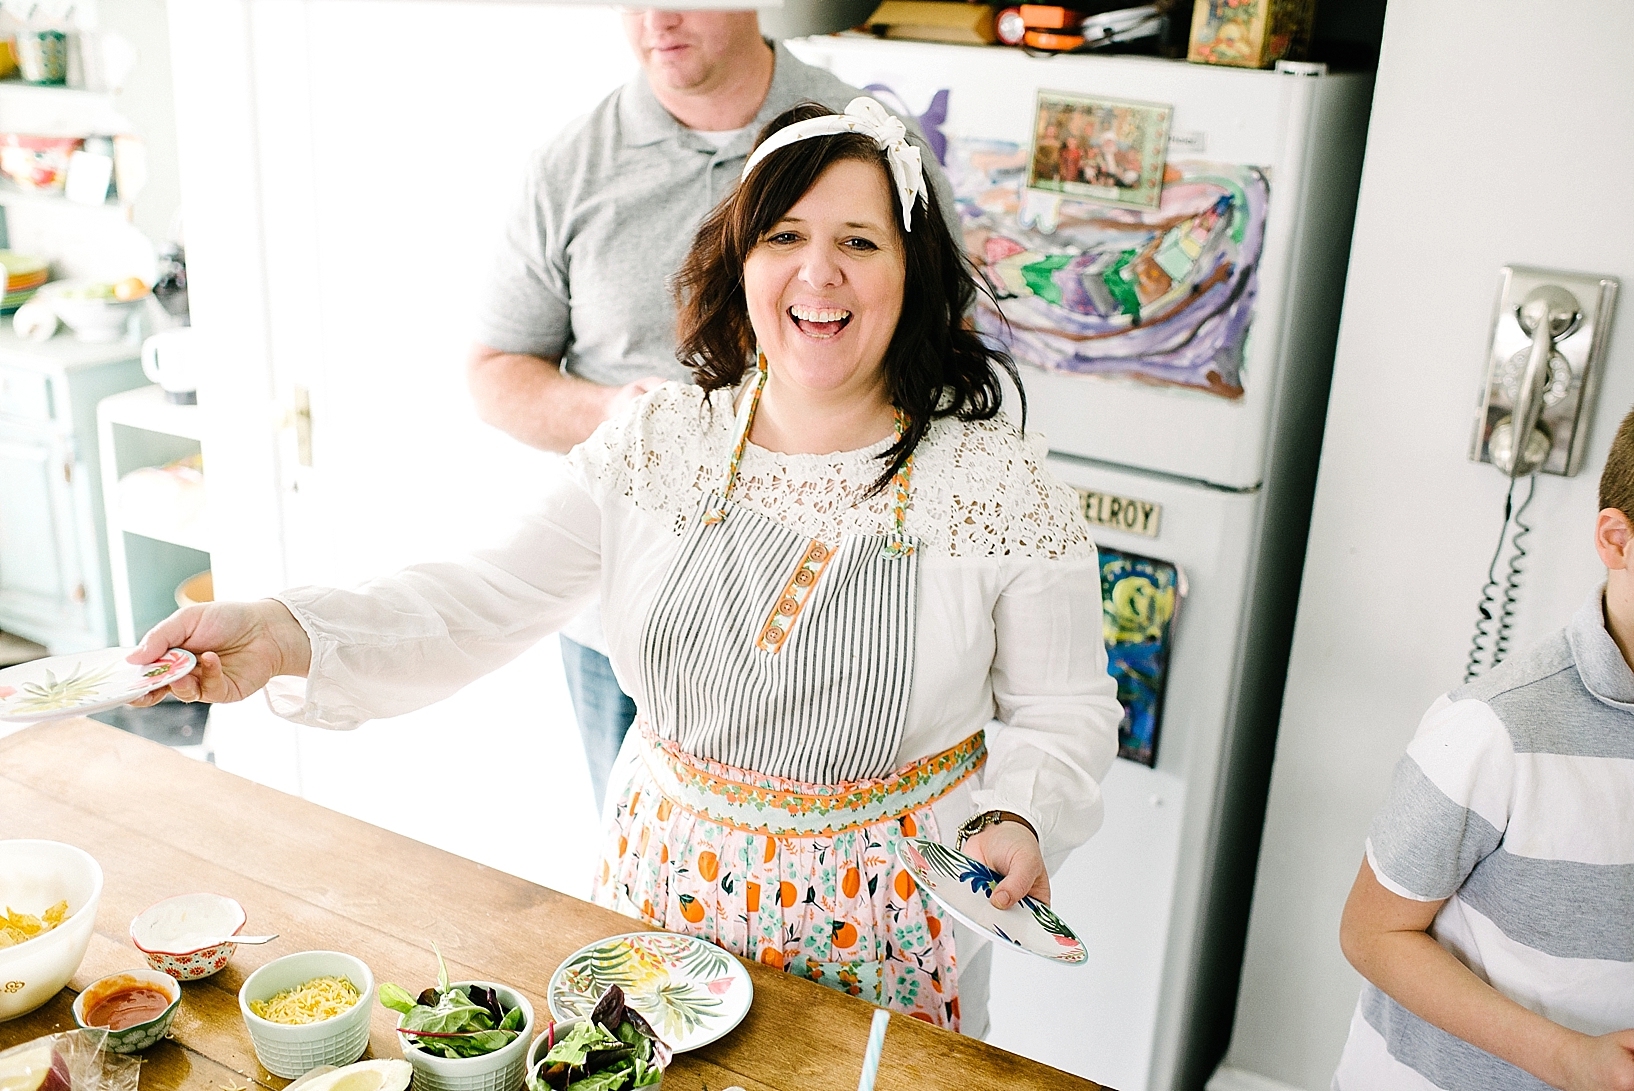 woman wearing patterned apron handing out plates to and laughing